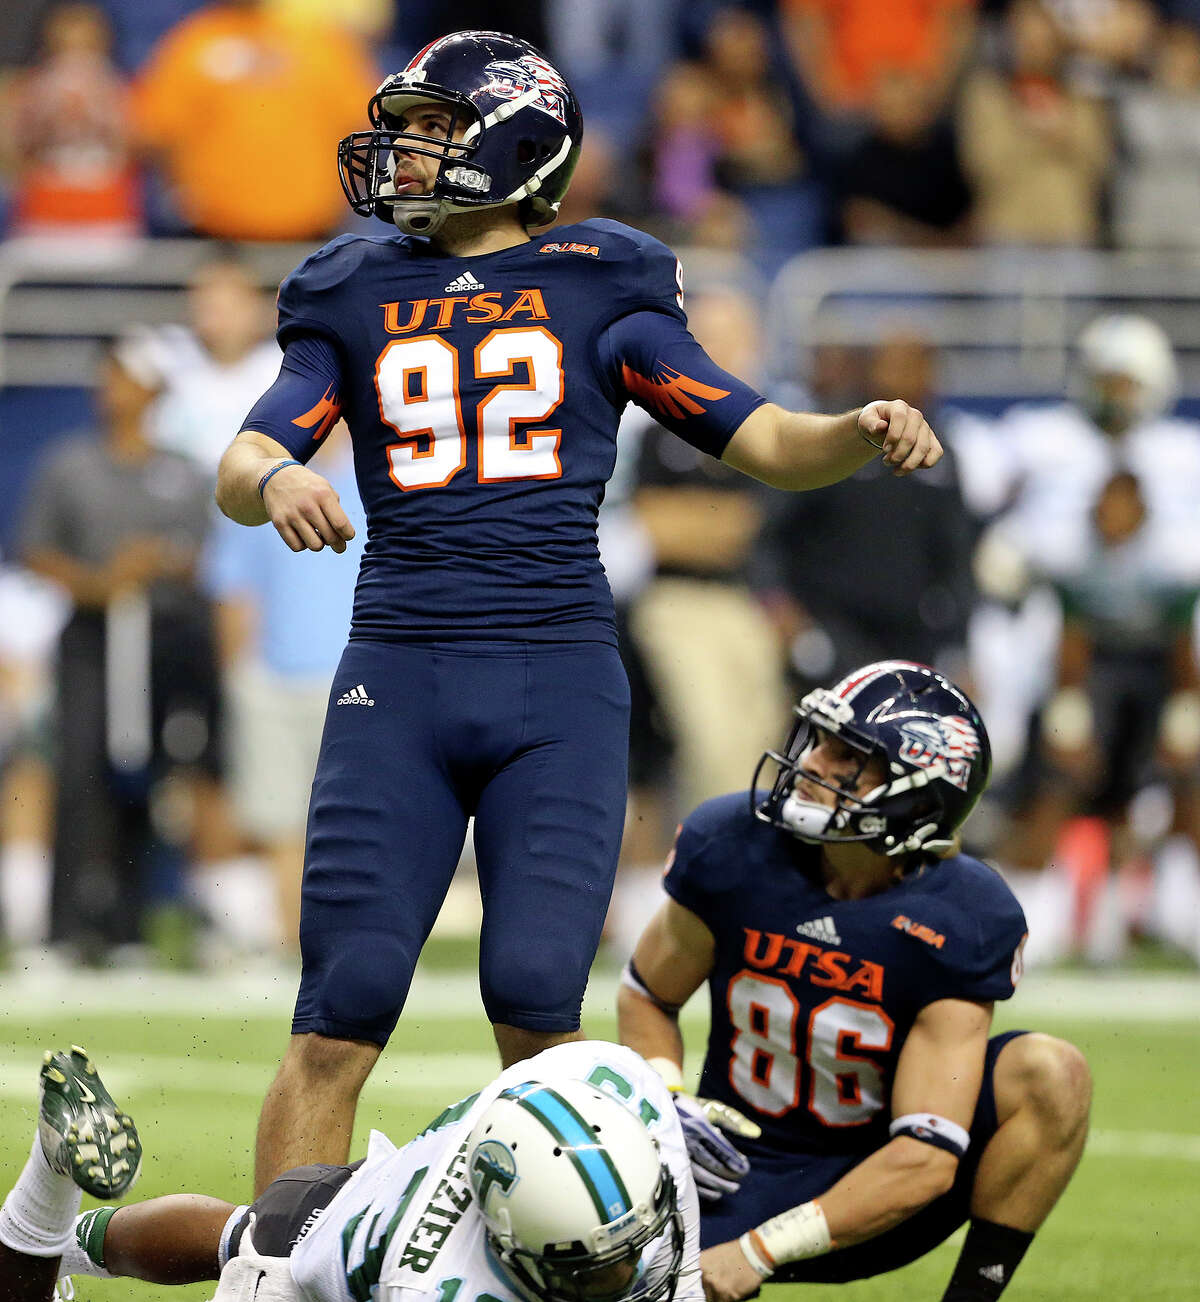 Sean Ianno watches his kick go through the uprights to prove the winning score as holder Seth Grubb holds as UTSA hosts Tulane at the Alamodome on November 10, 2013.